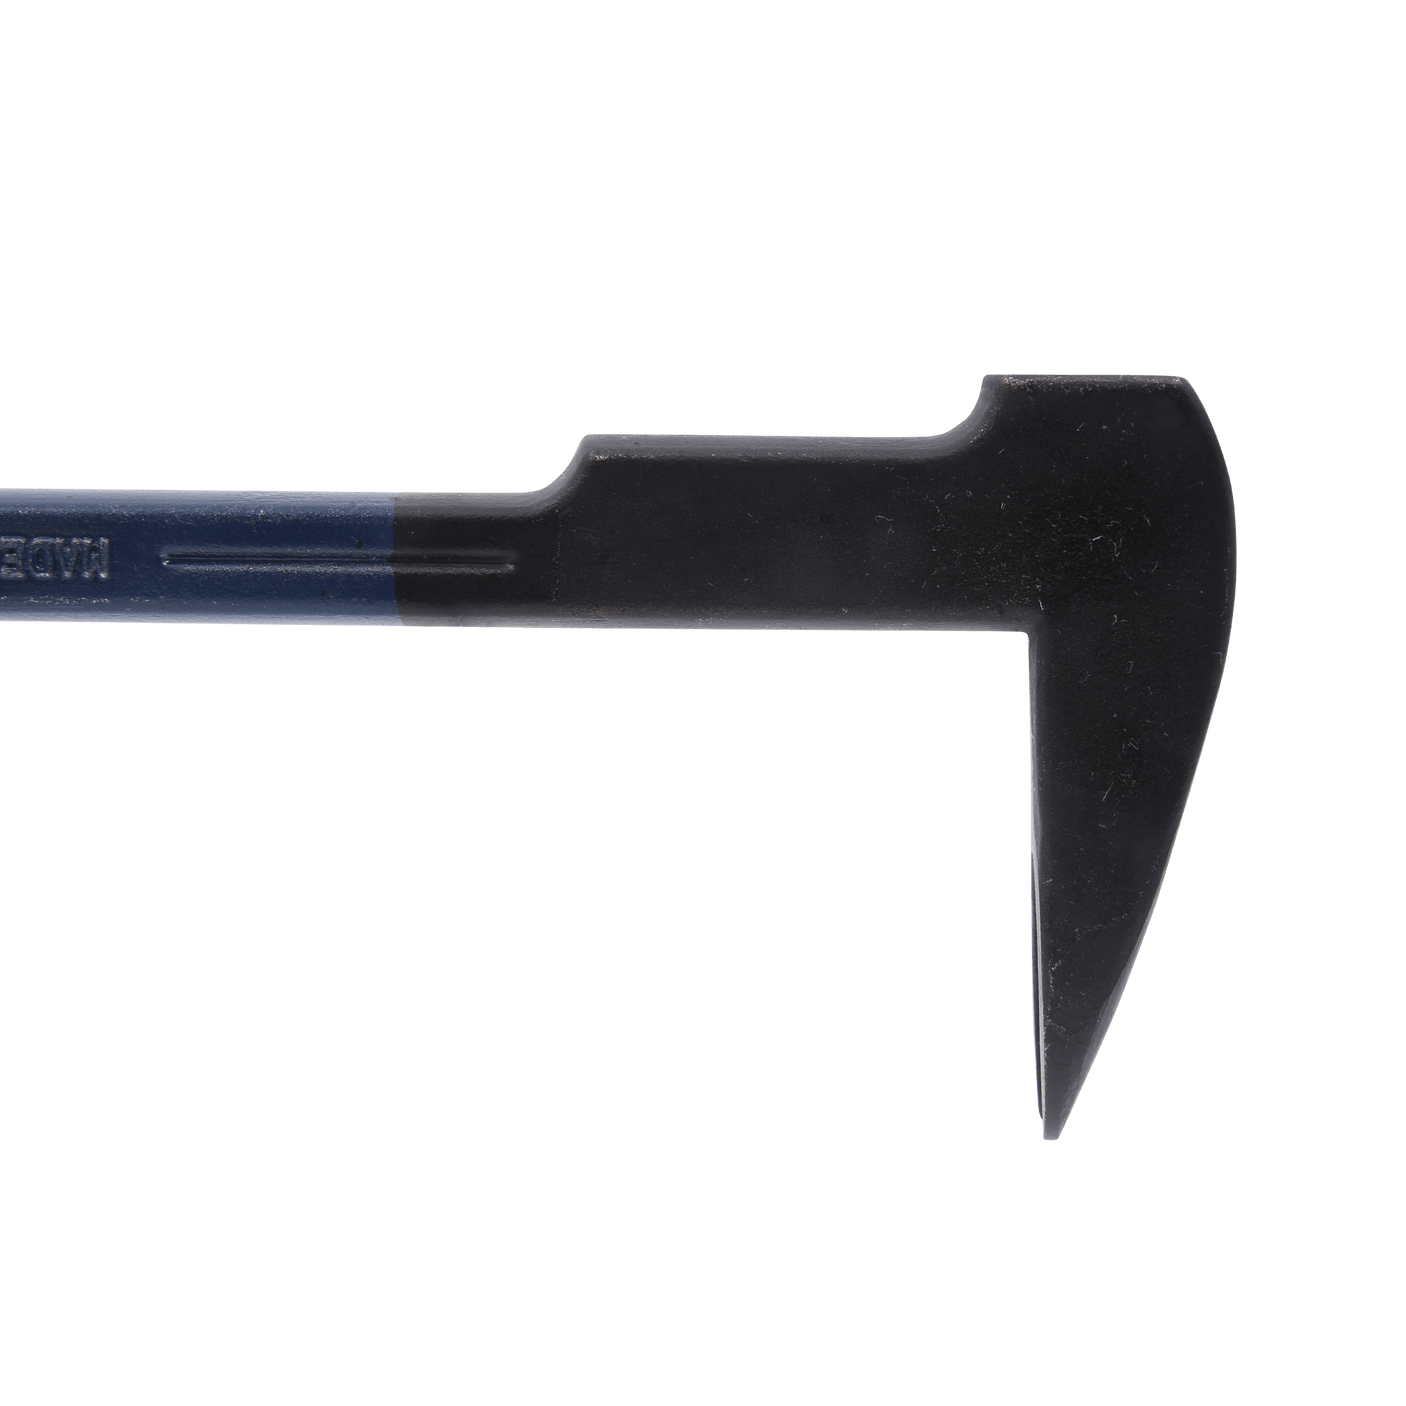 Demolition Pry Bar and Nail Puller - Hammers - Japanese Tools Australia